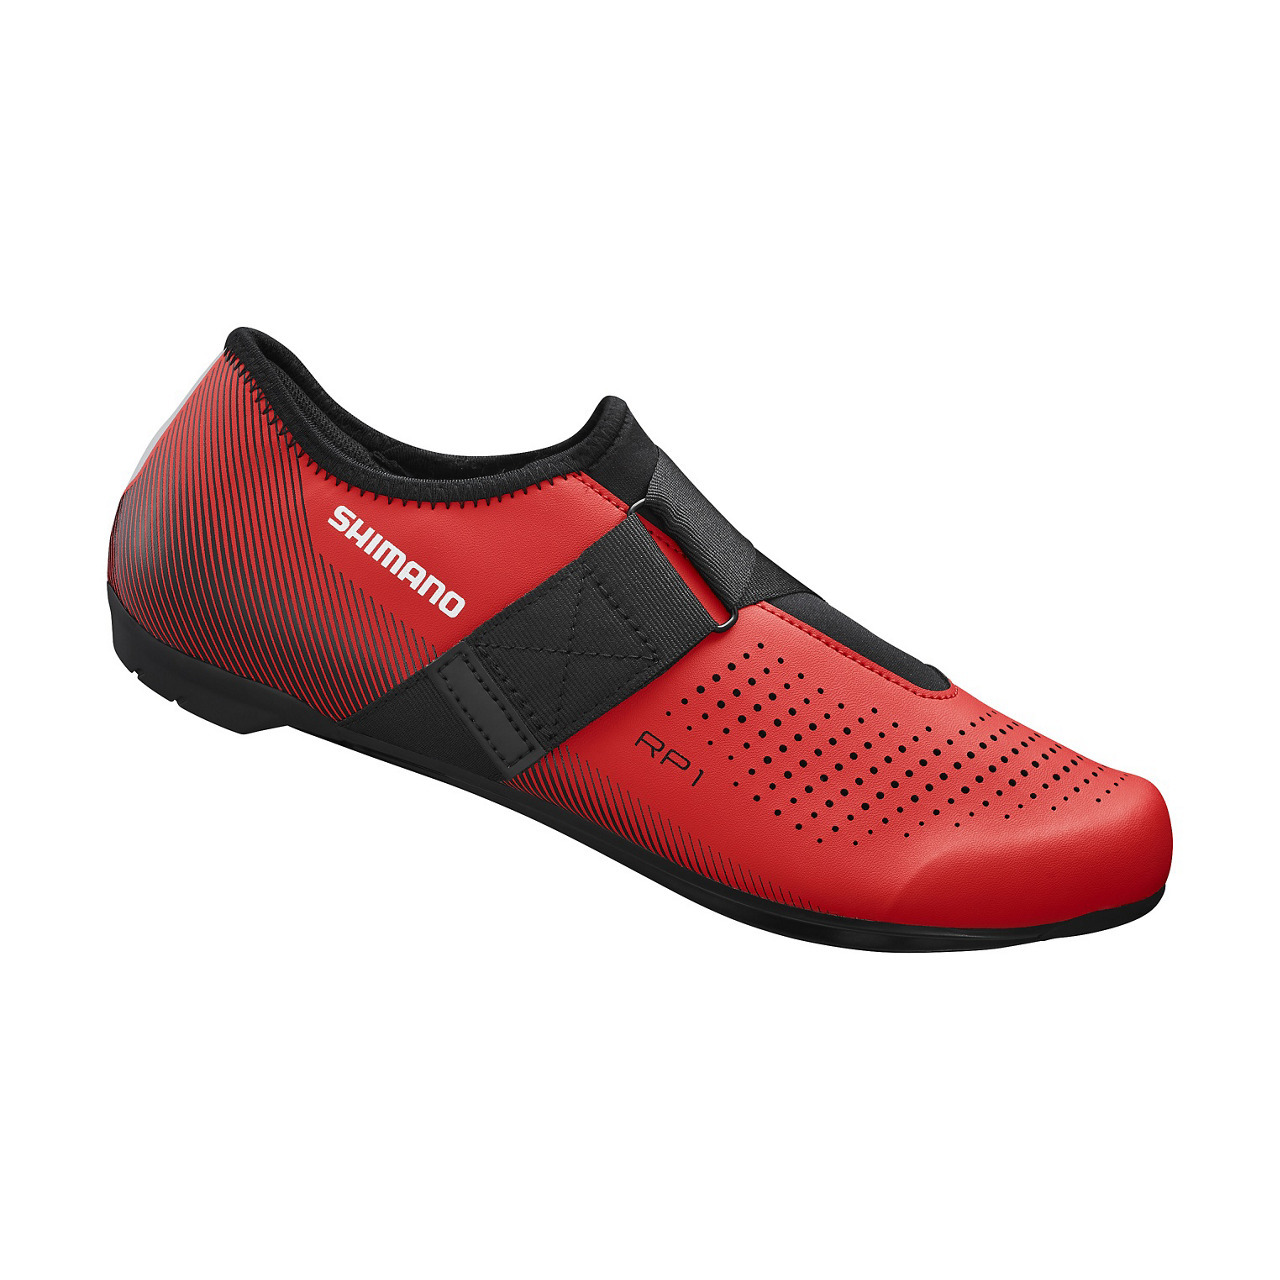 Chaussures Shimano sh-rp101